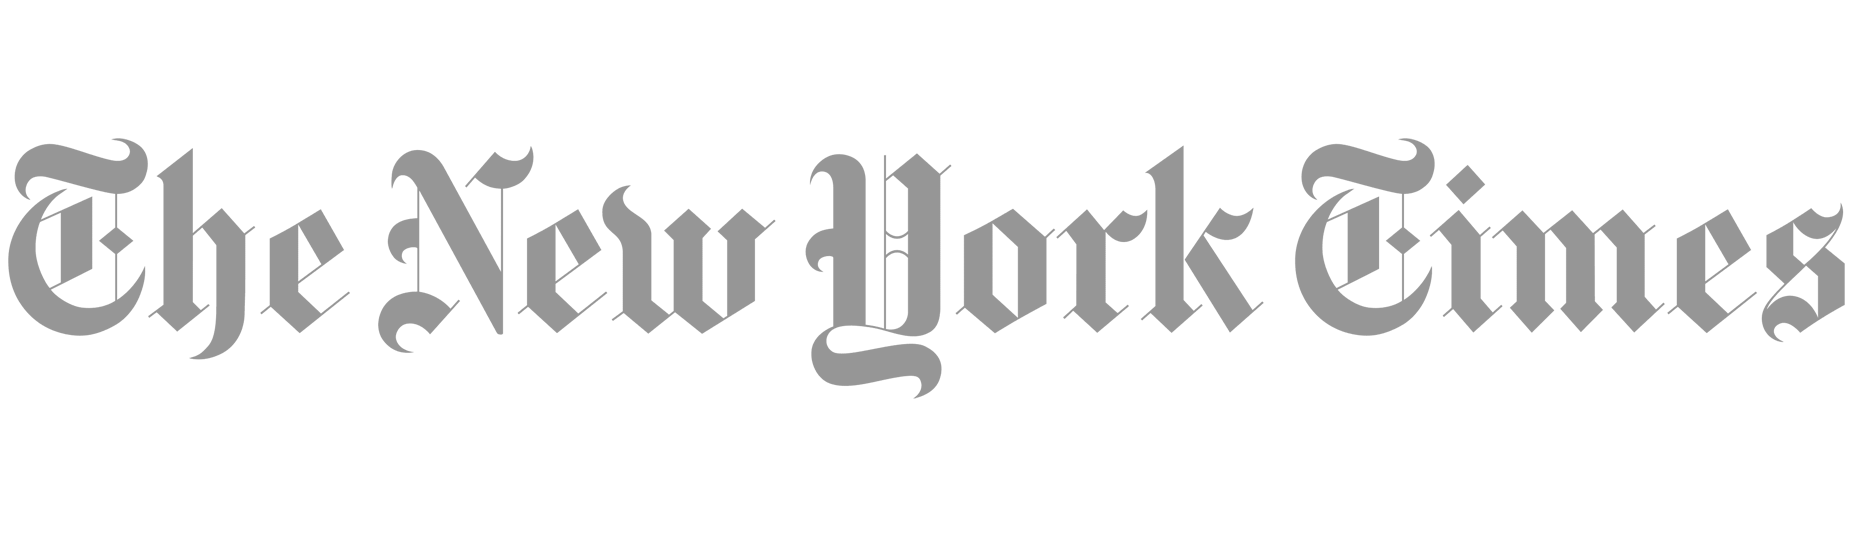 the new york times logo